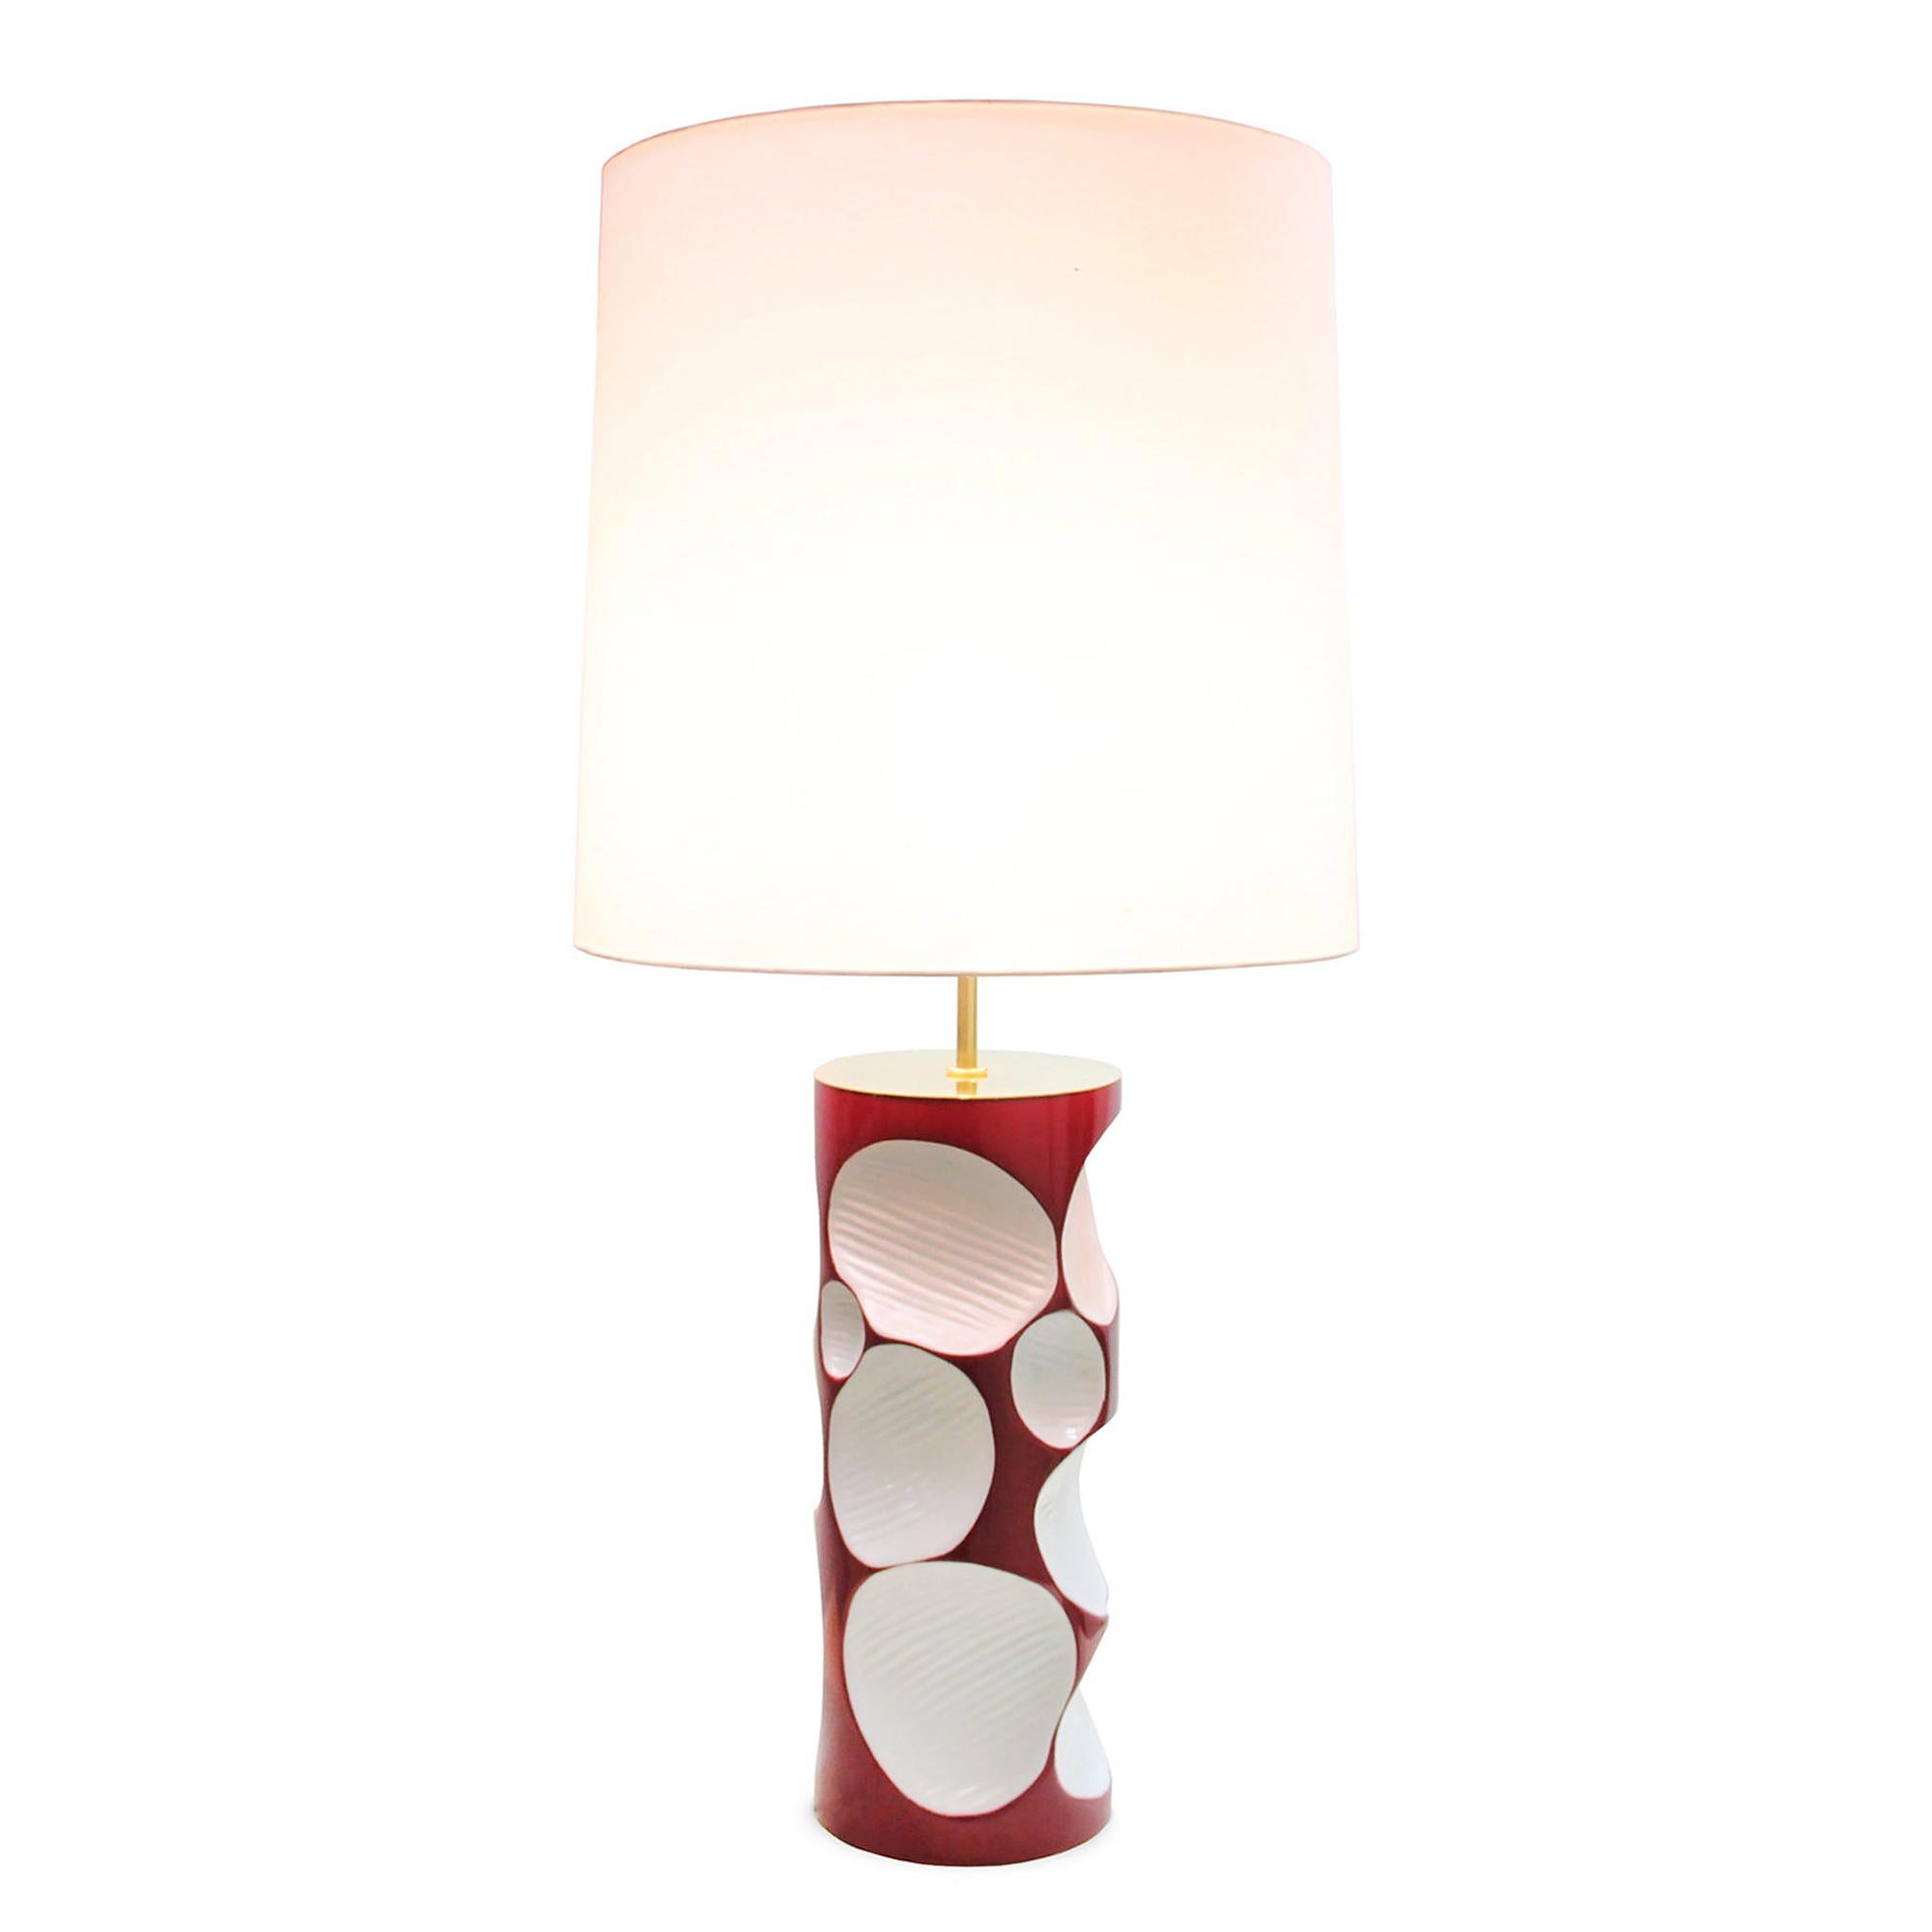 Table lamp Allia with structure in fiberglass
in red laquered finish. With top of the base in 
polished brass. With white satin shade included.
1 bulb, lamp holder type E27, max 40 watts.
Bulb not included.
     